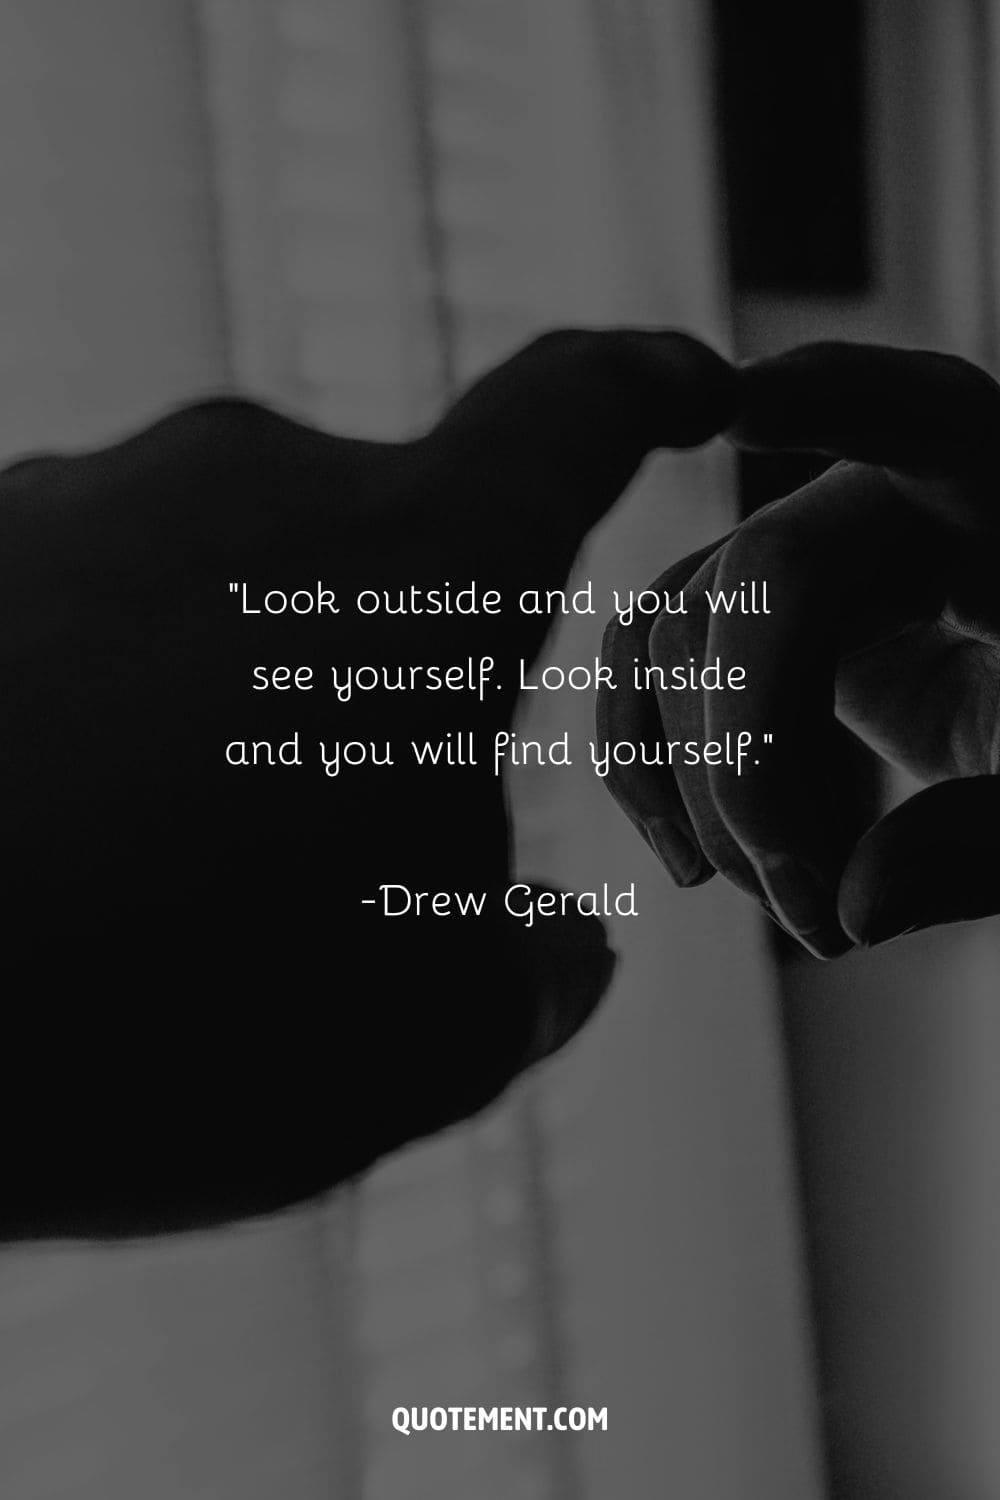 Look outside and you will see yourself. Look inside and you will find yourself. – Drew Gerald